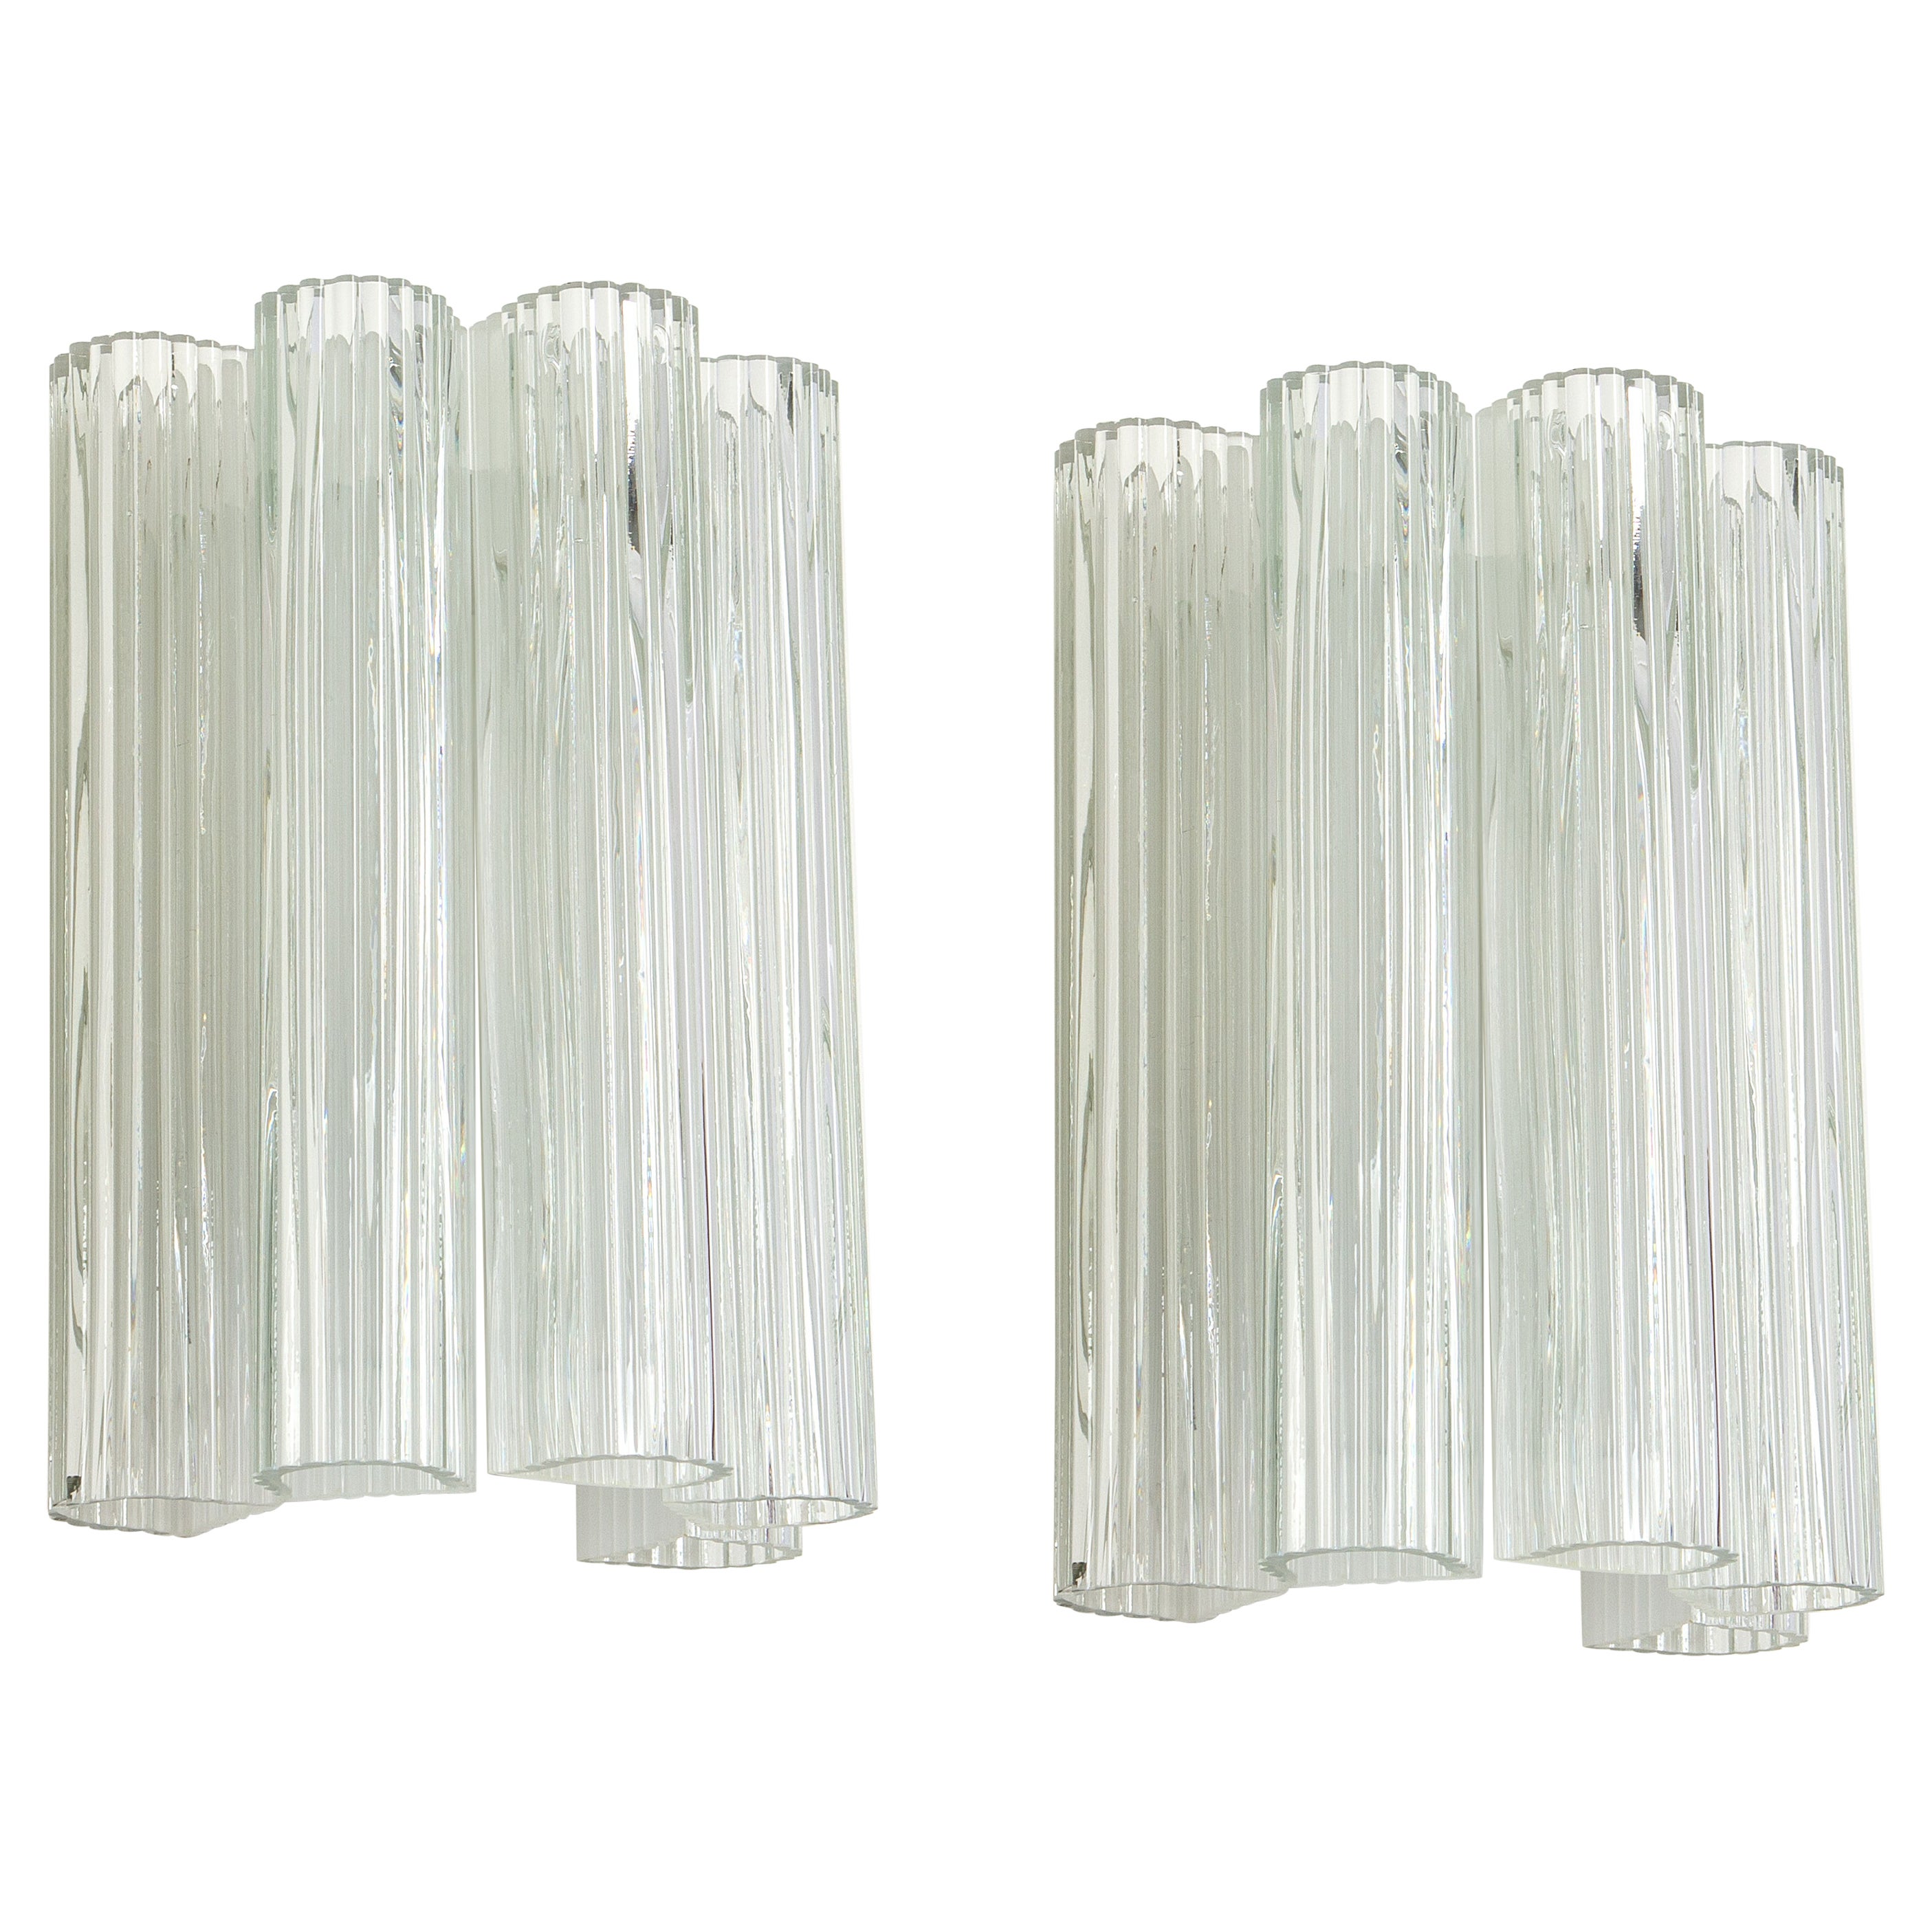 1 of 4 Large Murano Glass Wall Sconces by Doria, Germany, 1960s